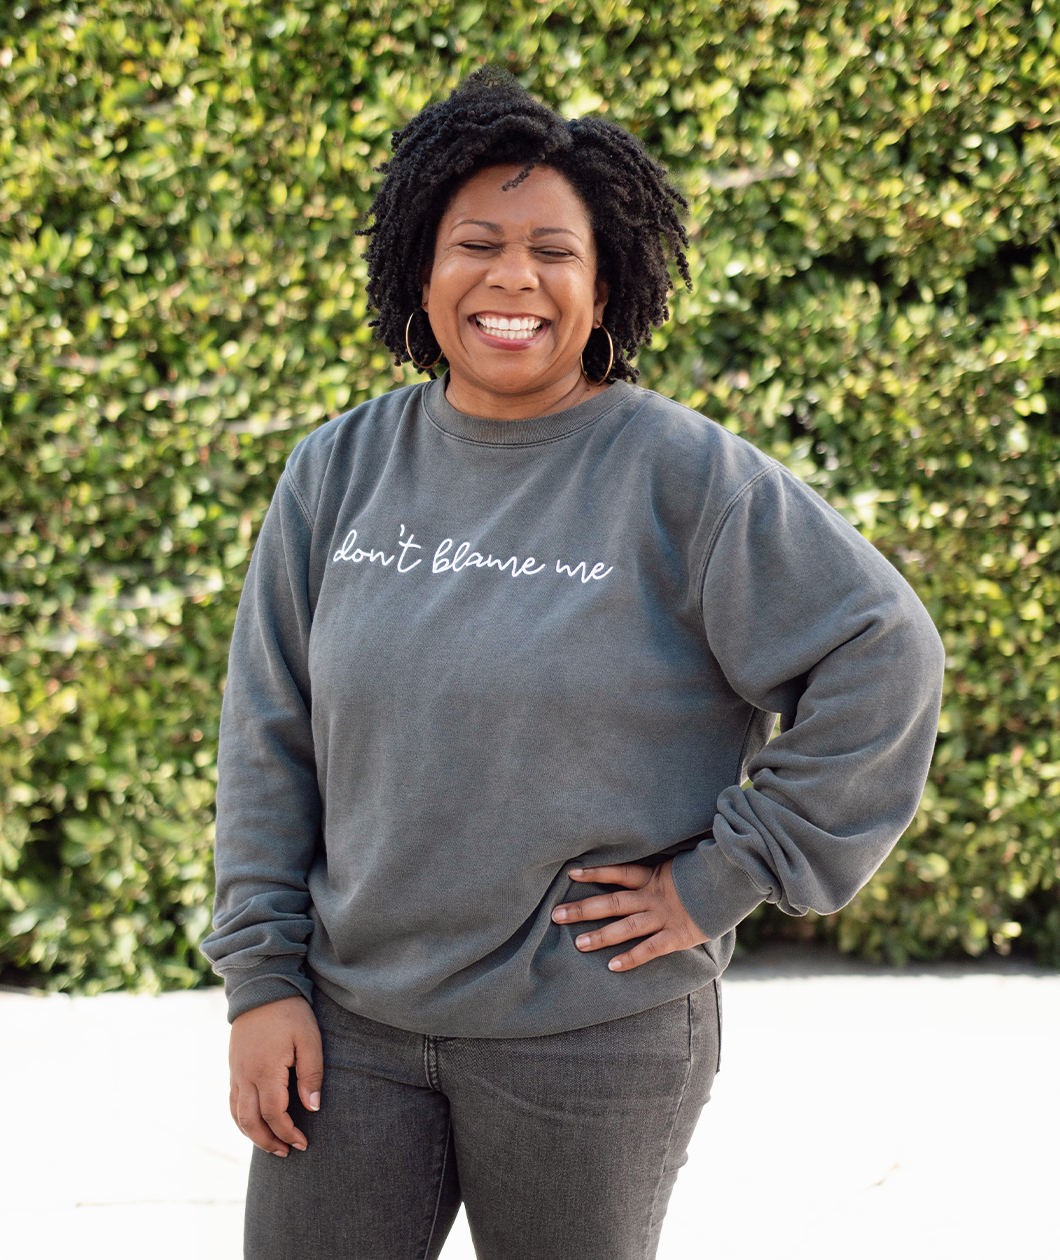 Melissa Monts modeling a gray crewneck sweatshirt with “don’t blame me” across chest in white cursive font - from Don’t Blame Me